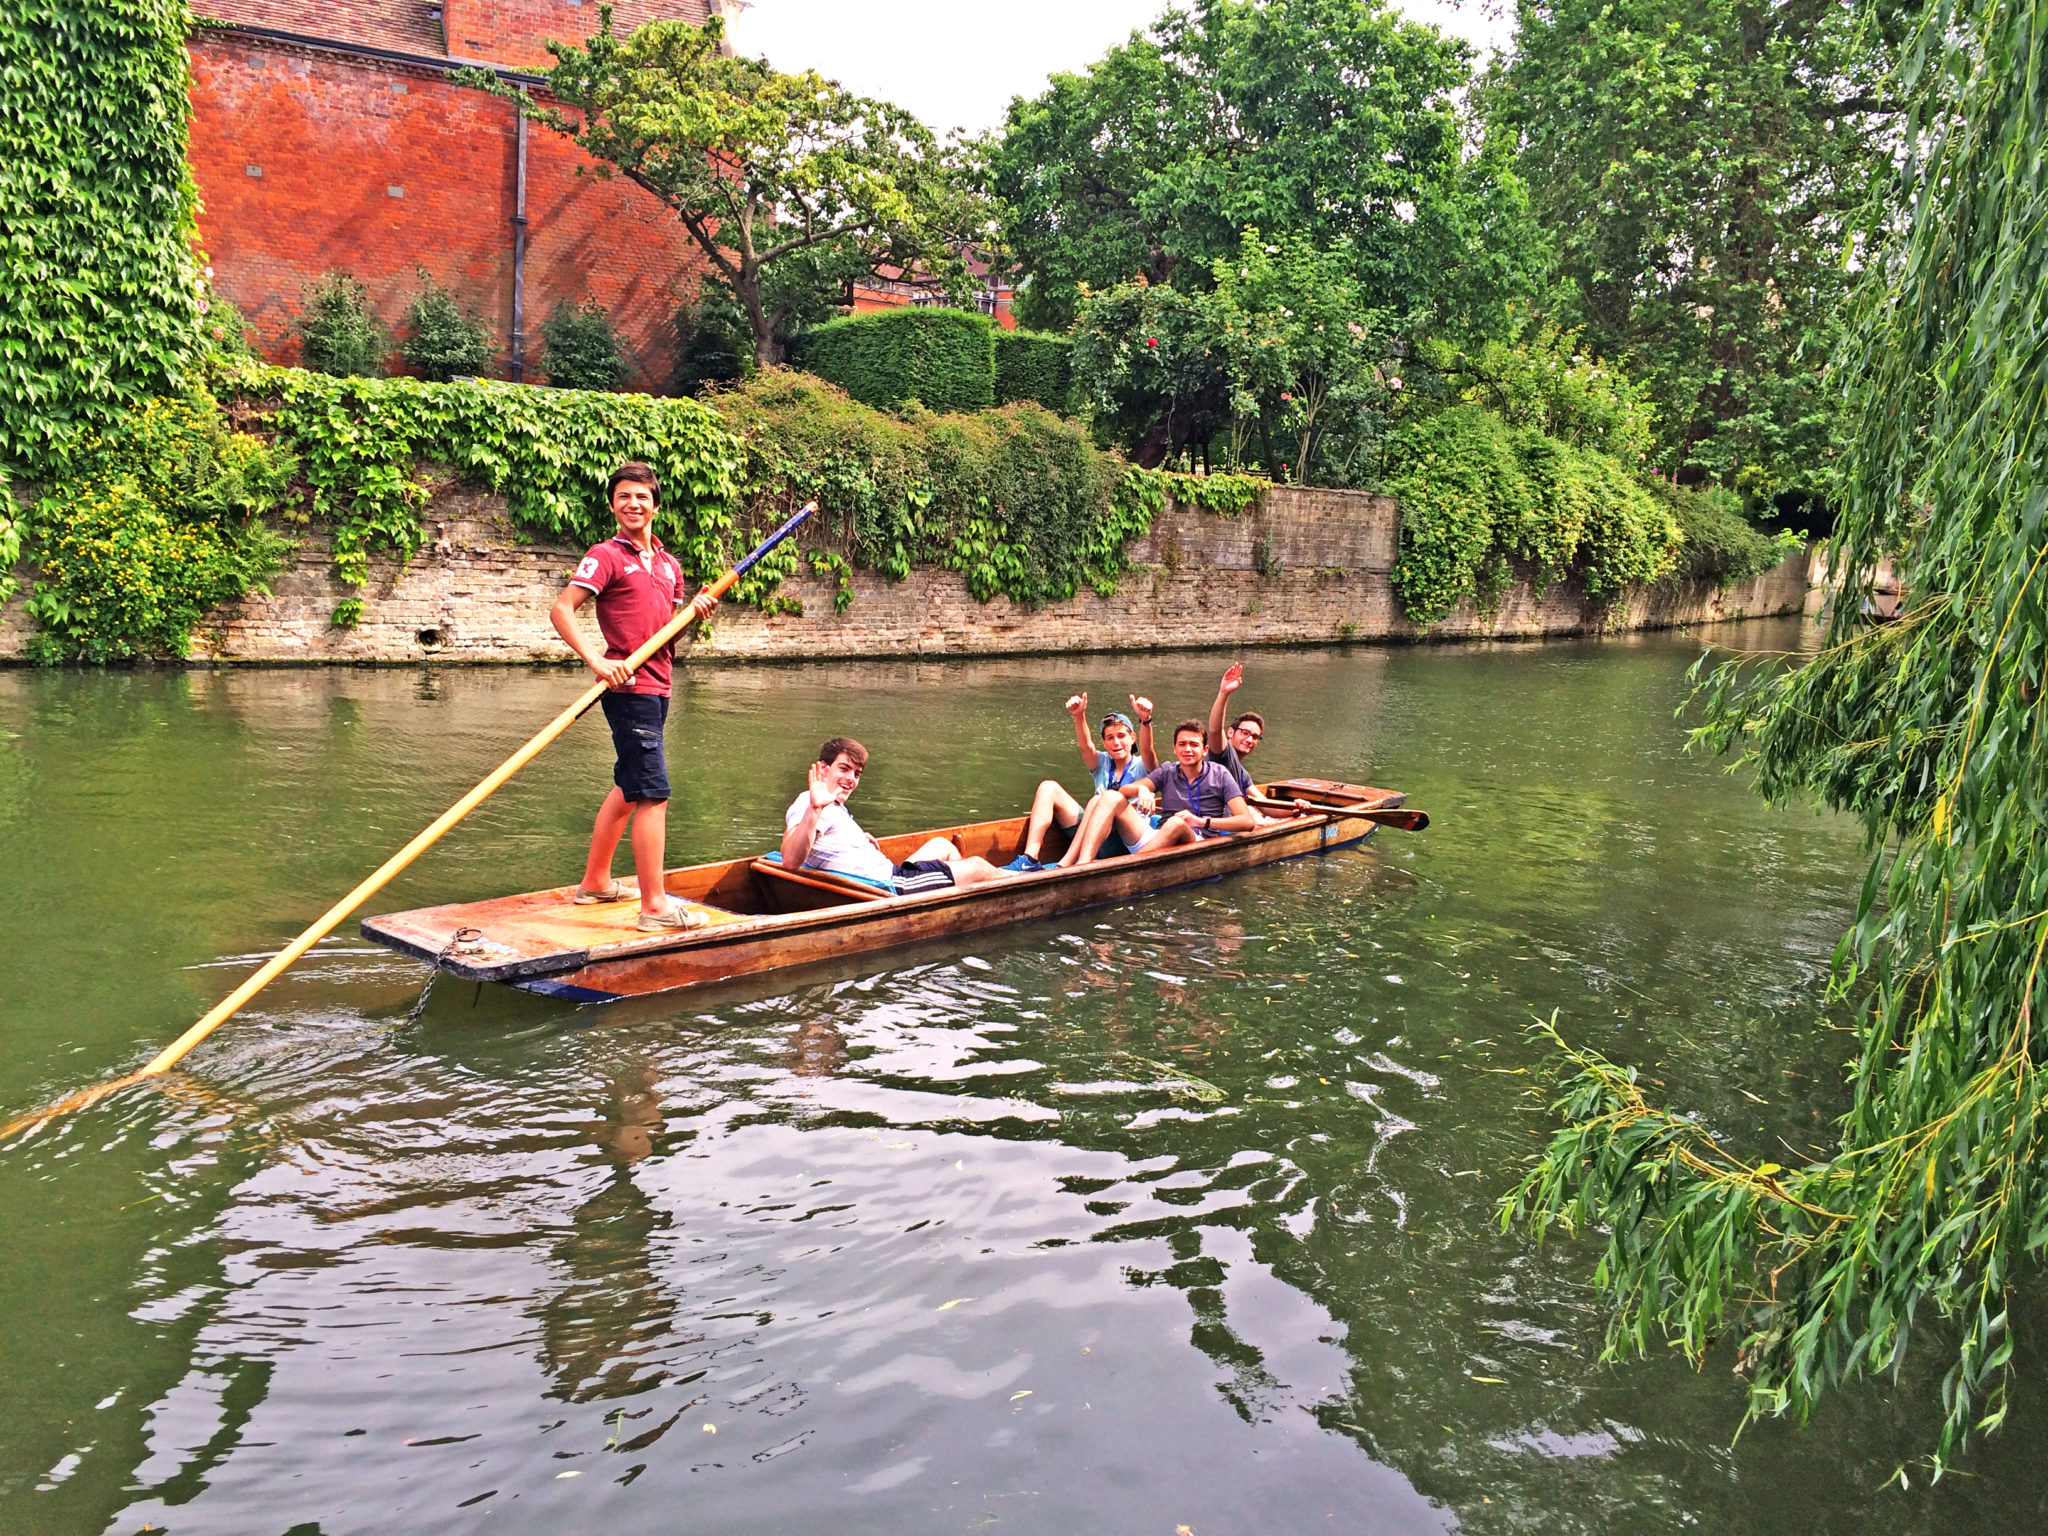 A group of students punting on the River Cam. One student stands at the back of the punt holding a pole. The others are sat in the boat, waving at the camera.